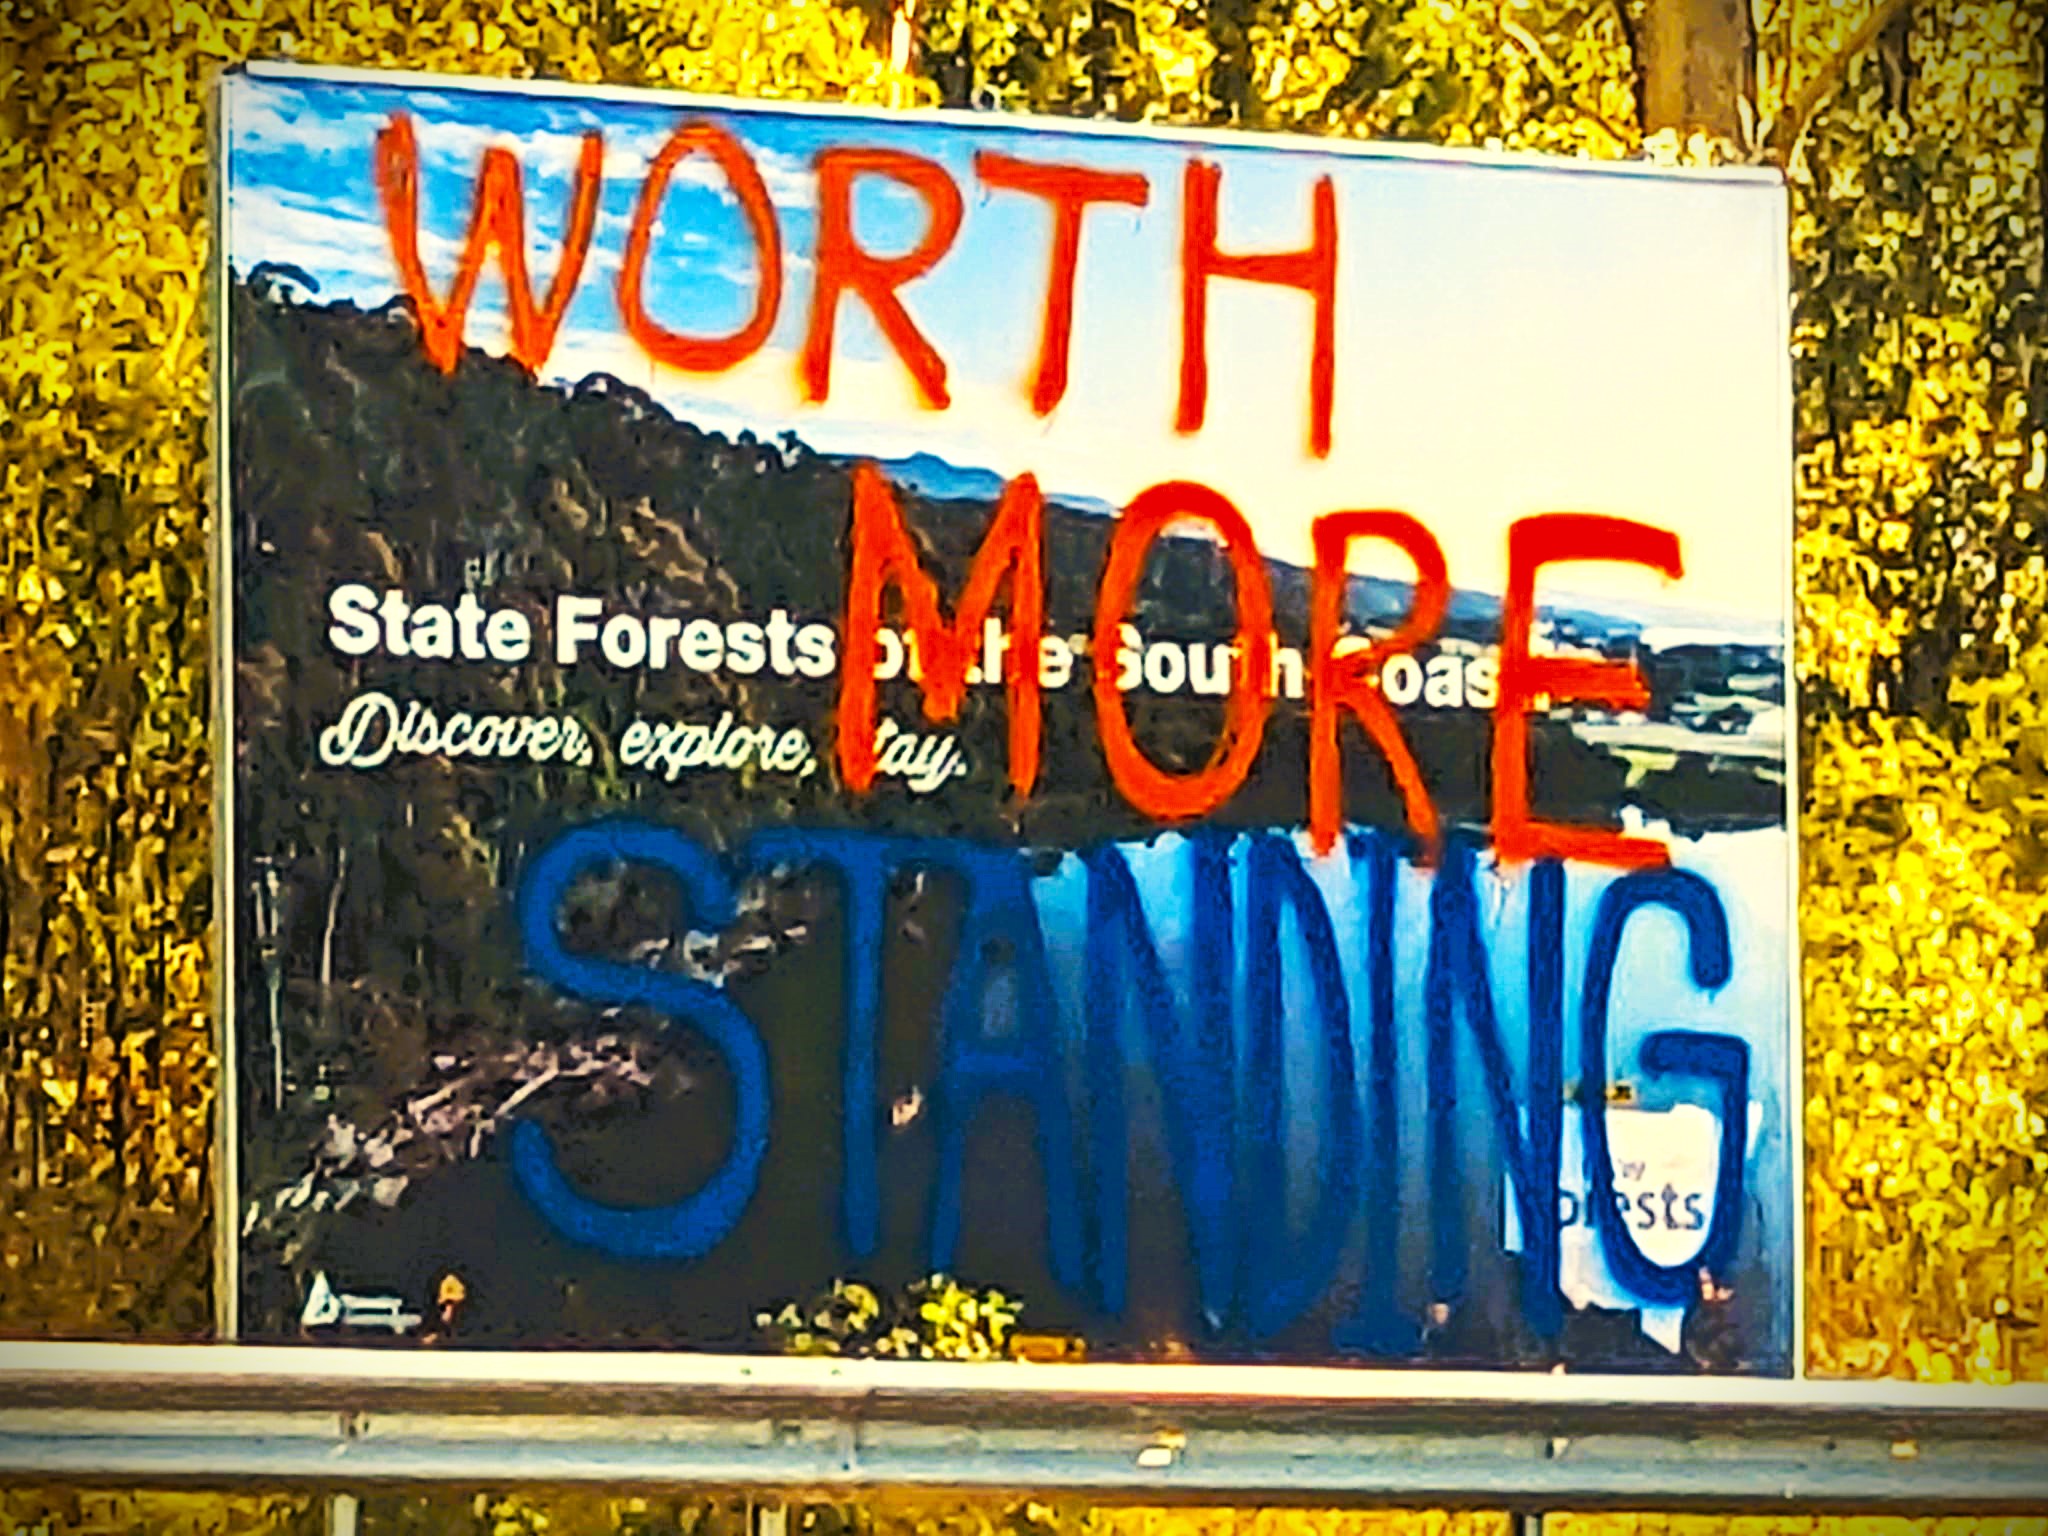 A highway billboard from State Forests spray painted over with Worth More Standing 